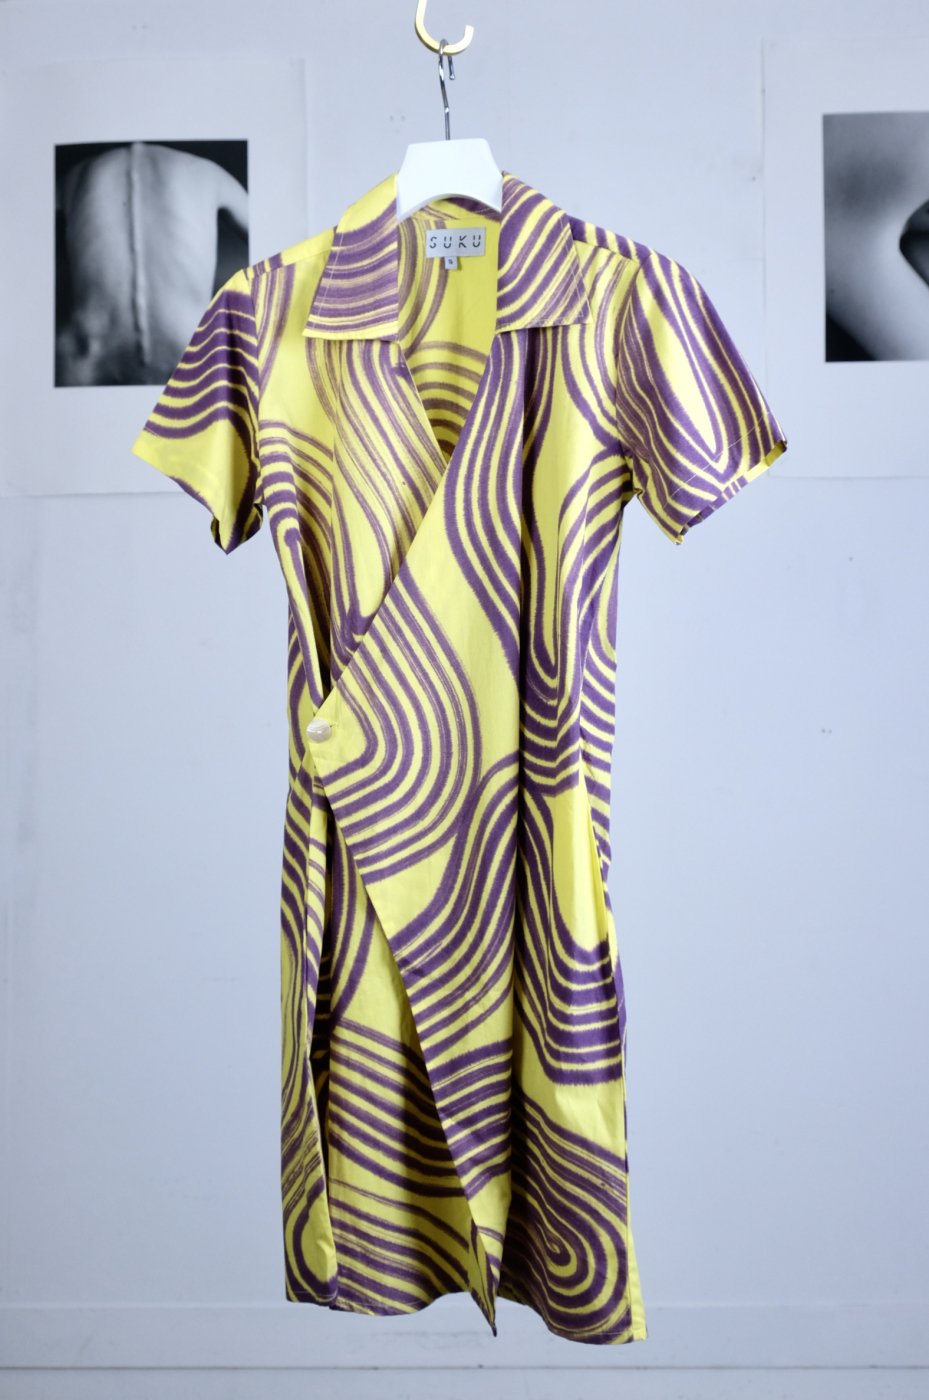 SUKU HOME "WRAP DRESS / YELLOW FLUX(HAND PAINTED)"